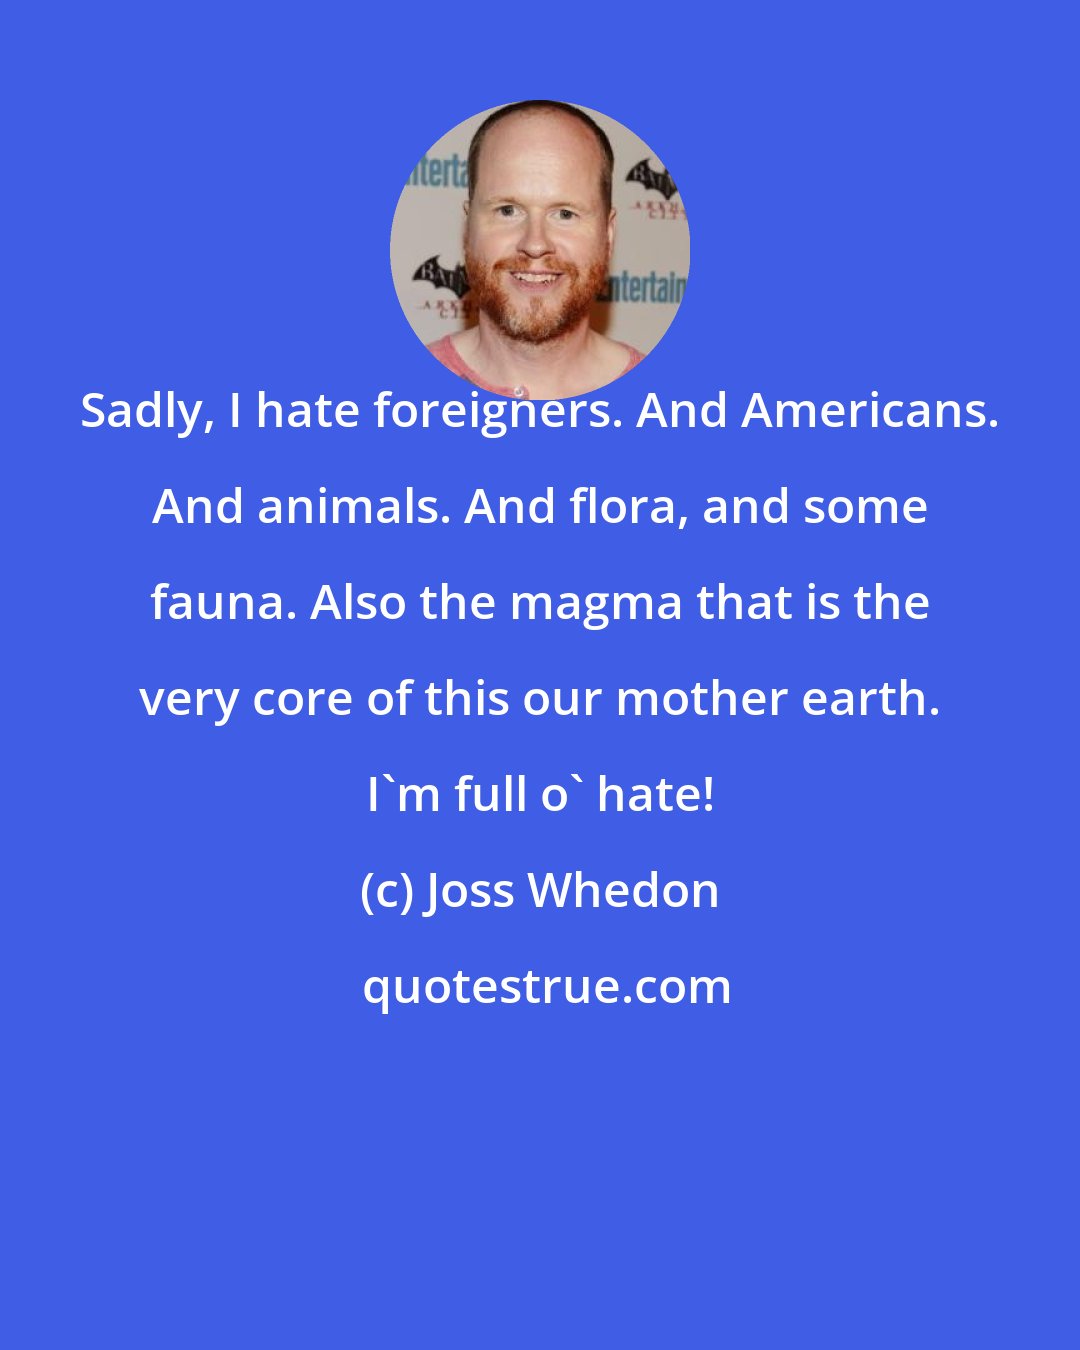 Joss Whedon: Sadly, I hate foreigners. And Americans. And animals. And flora, and some fauna. Also the magma that is the very core of this our mother earth. I'm full o' hate!